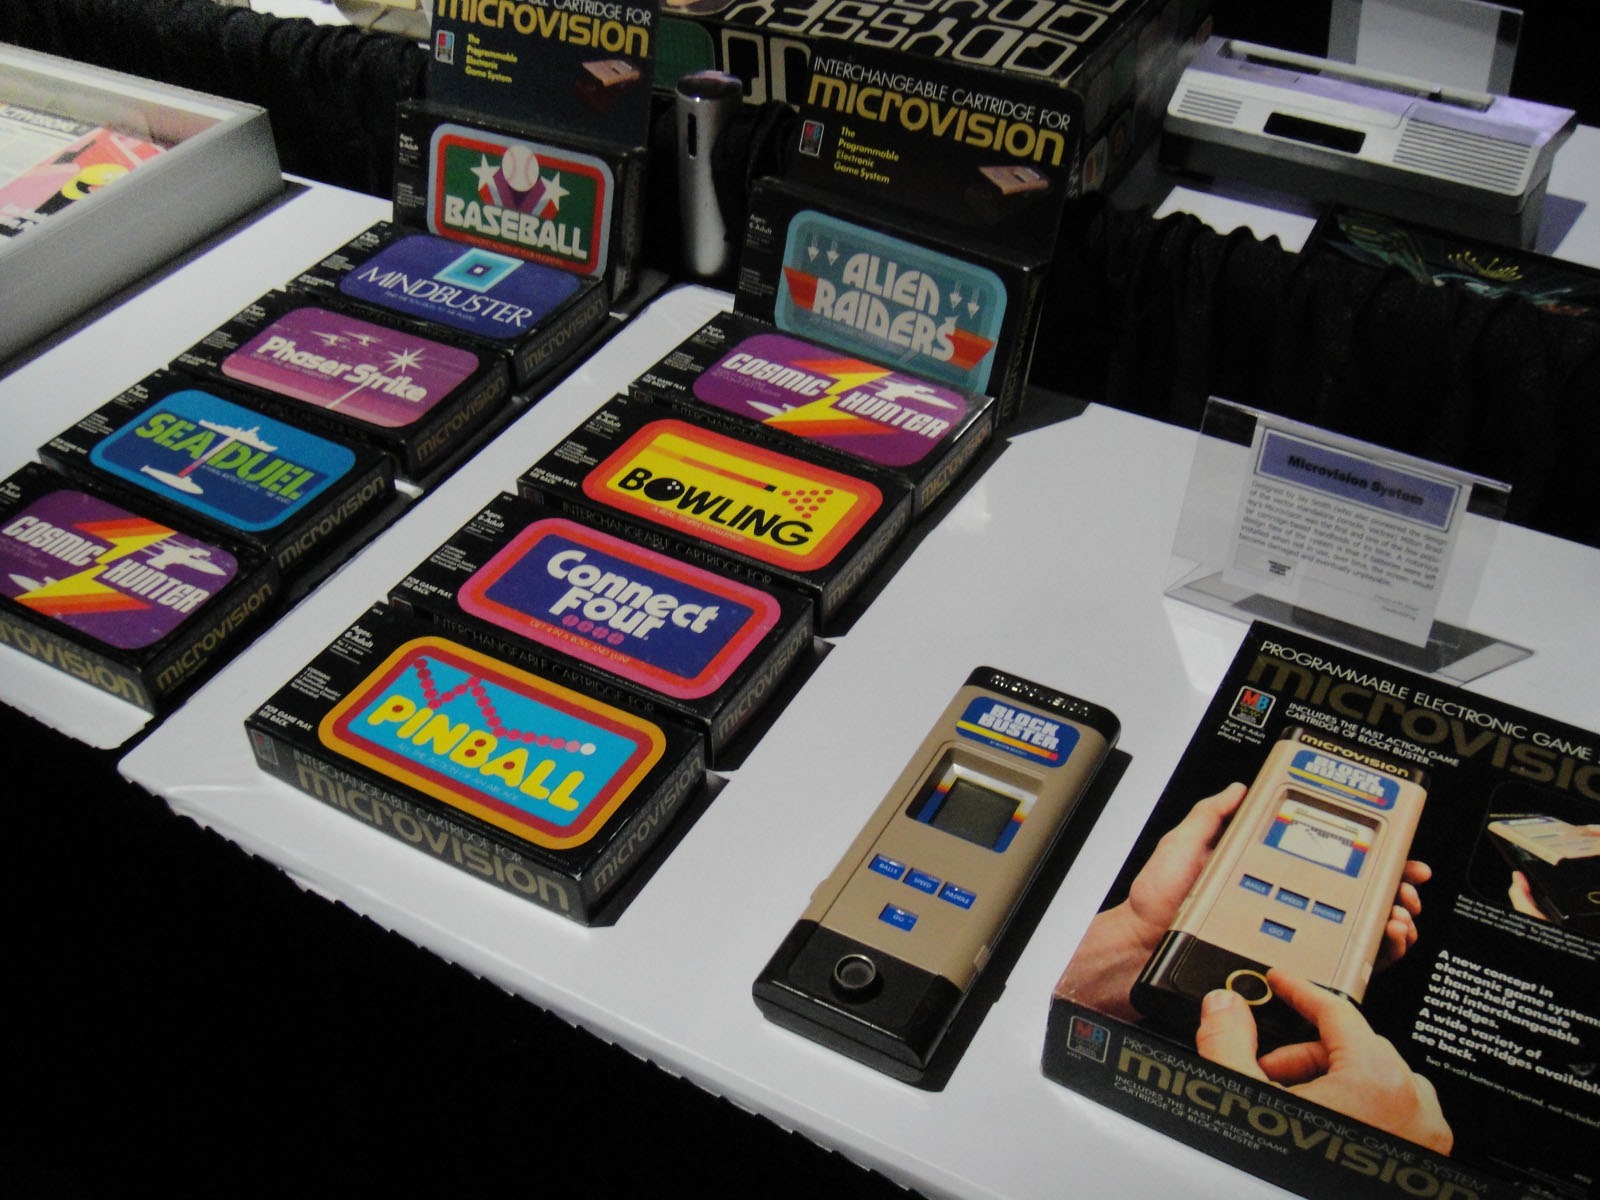 microvision’s variety of games piled together